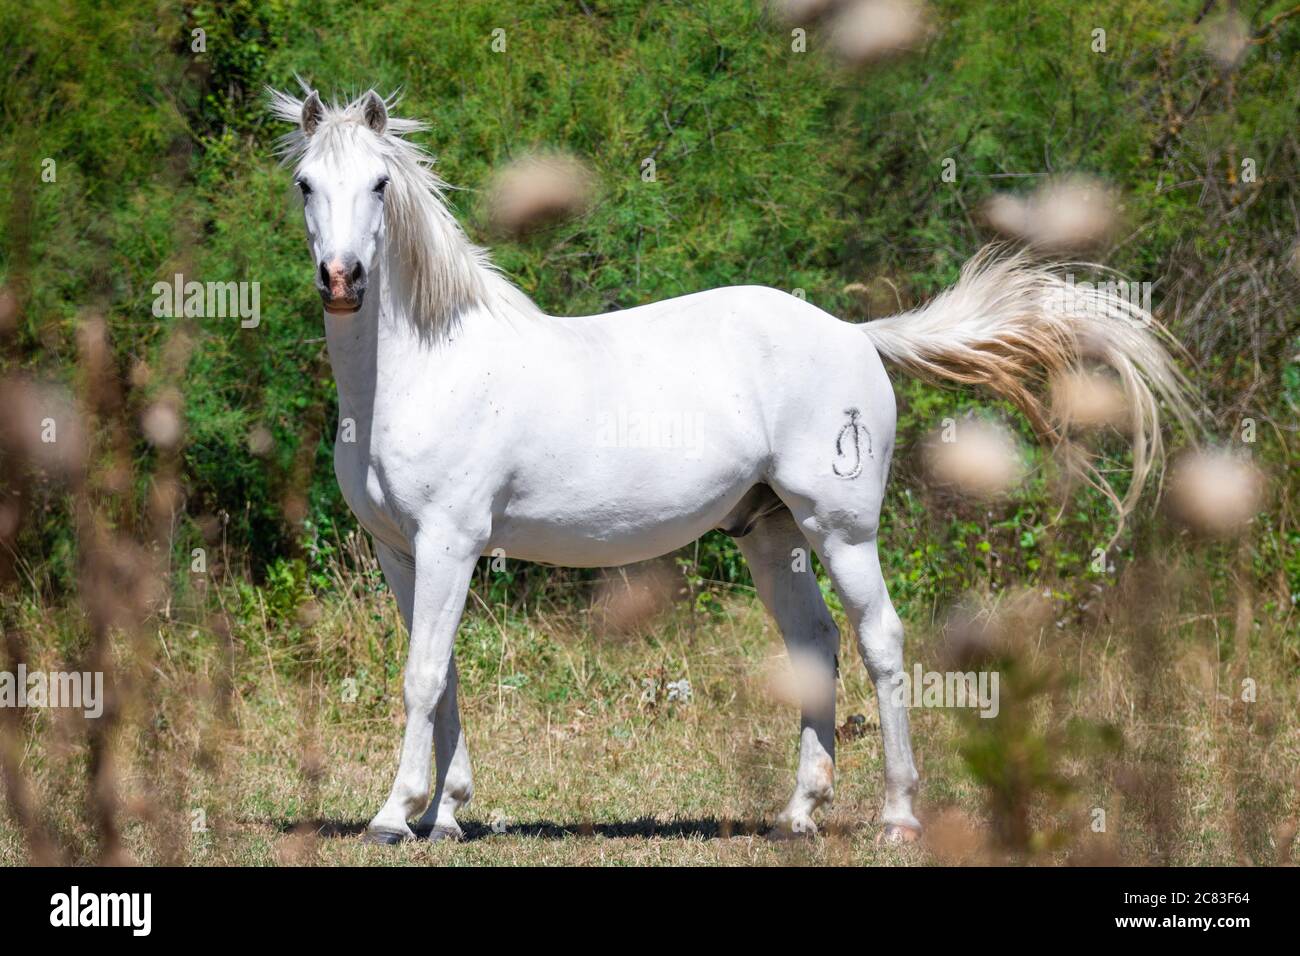 Close up of a white Camargue horse standing and looking sideways into the camera, against a background made of green bushes Stock Photo